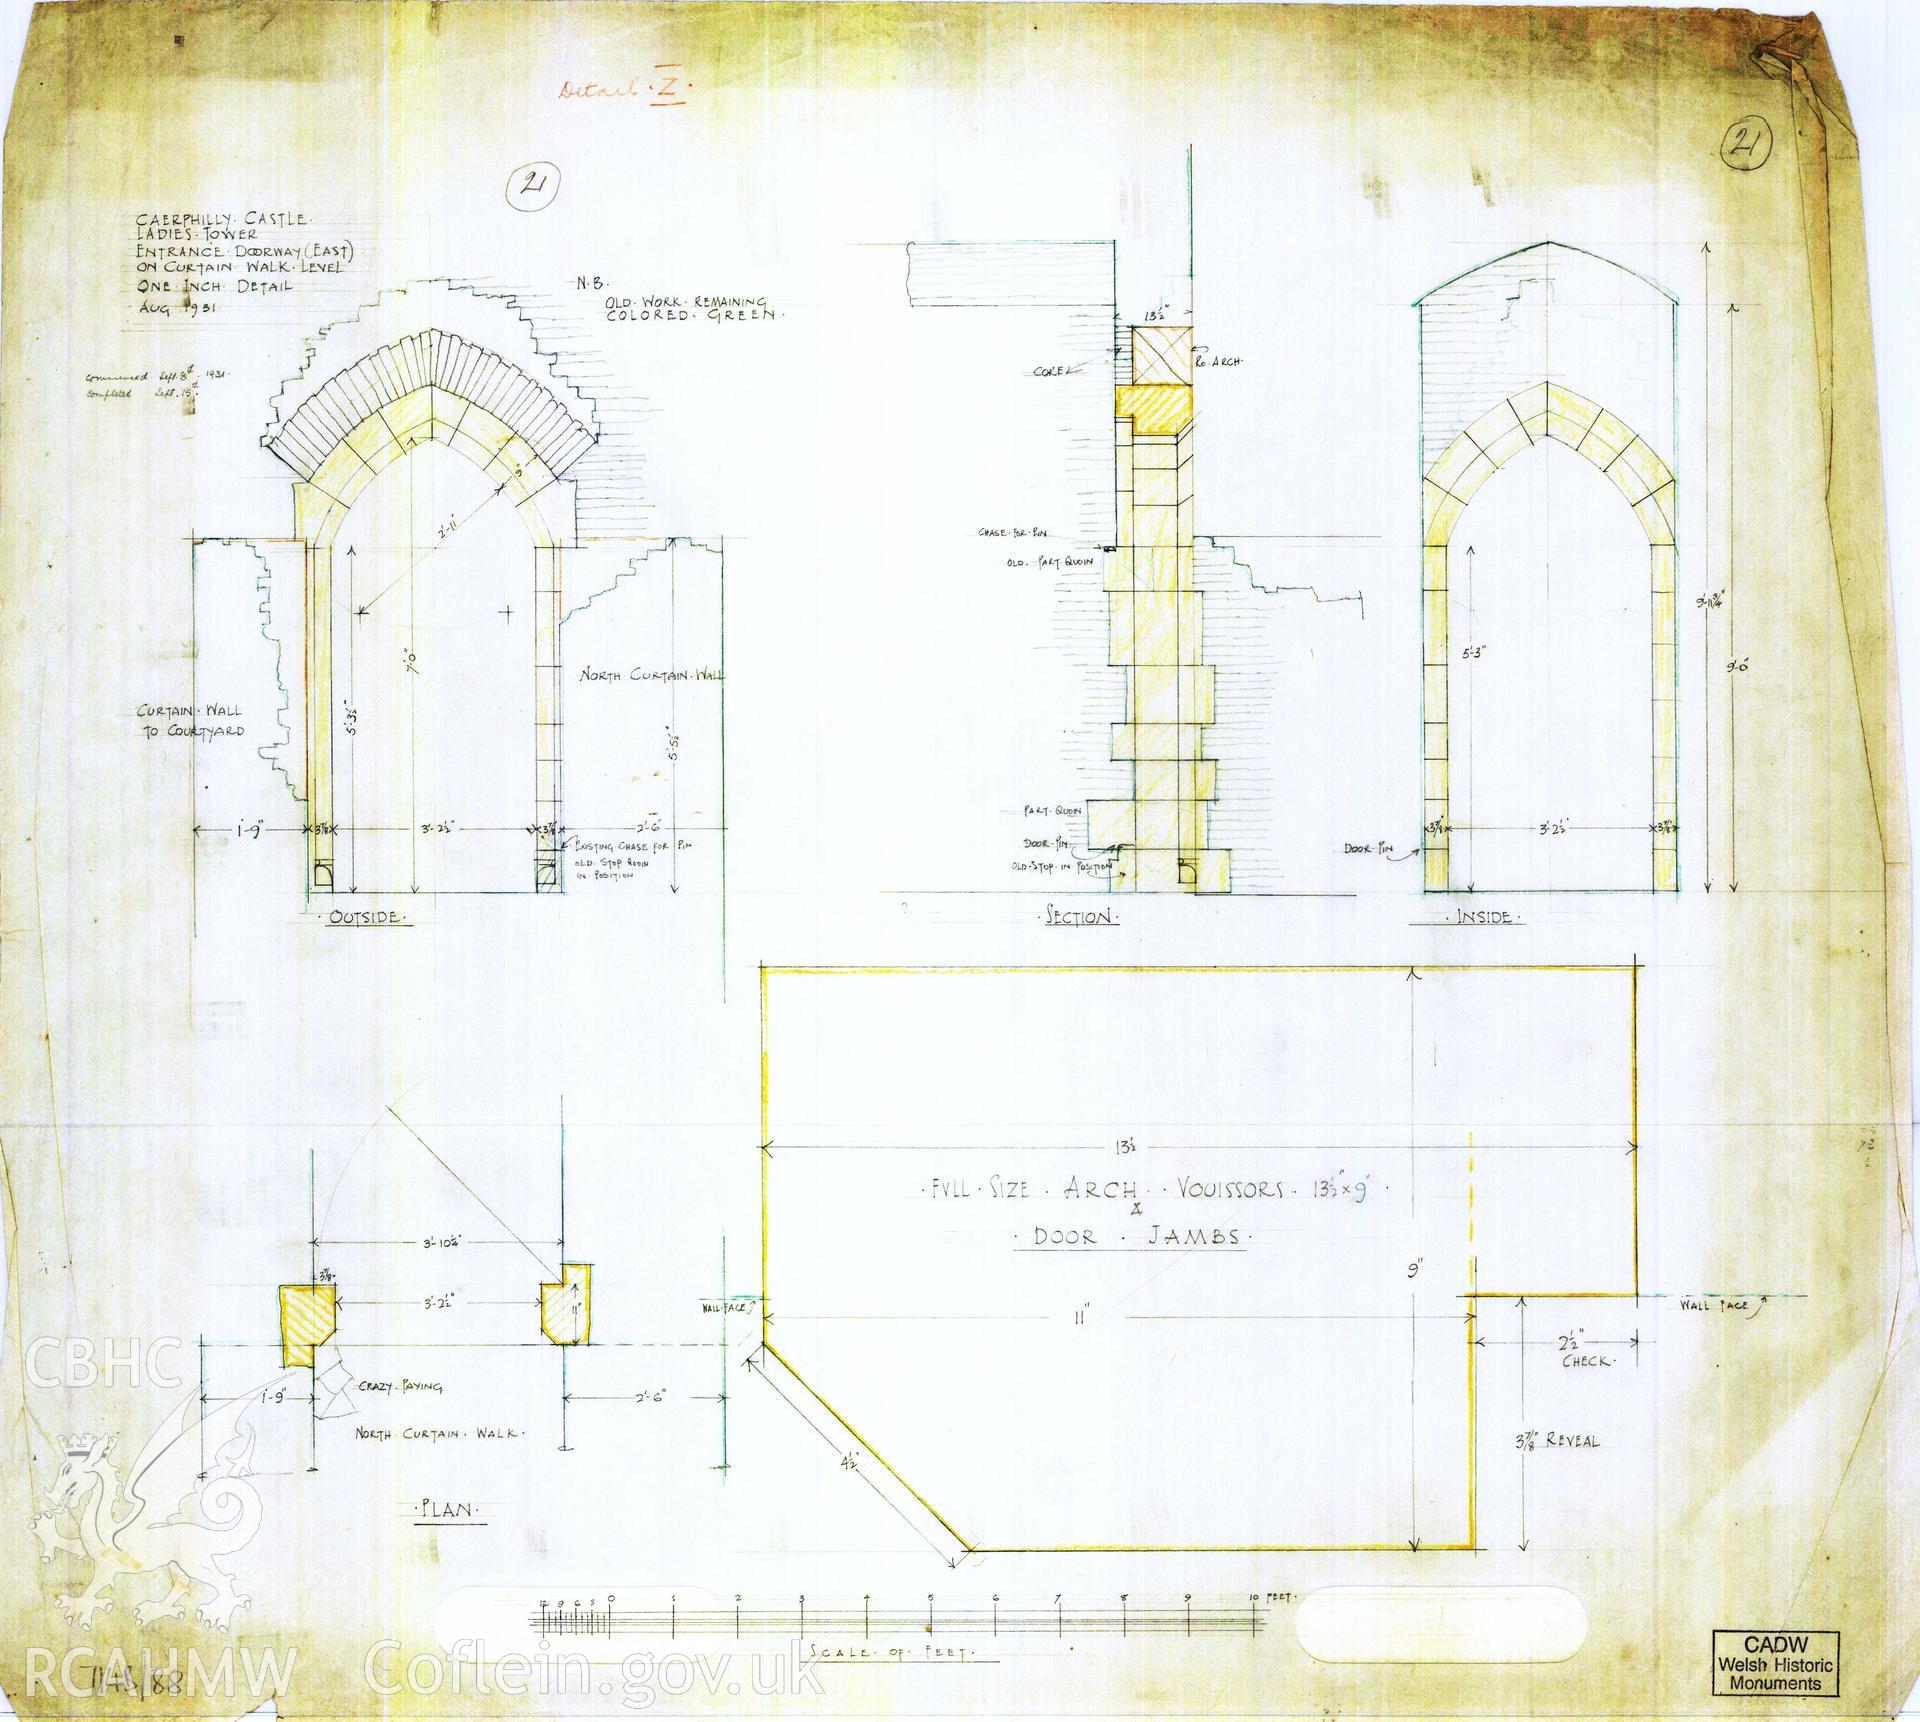 Digital copy of Cadw guardianship monument drawing of Caerphilly Castle. NW tower, E wallwalk door. Cadw ref. no: 714B/88. Scale 1:12. Original drawing withdrawn and returned to Cadw at their request.